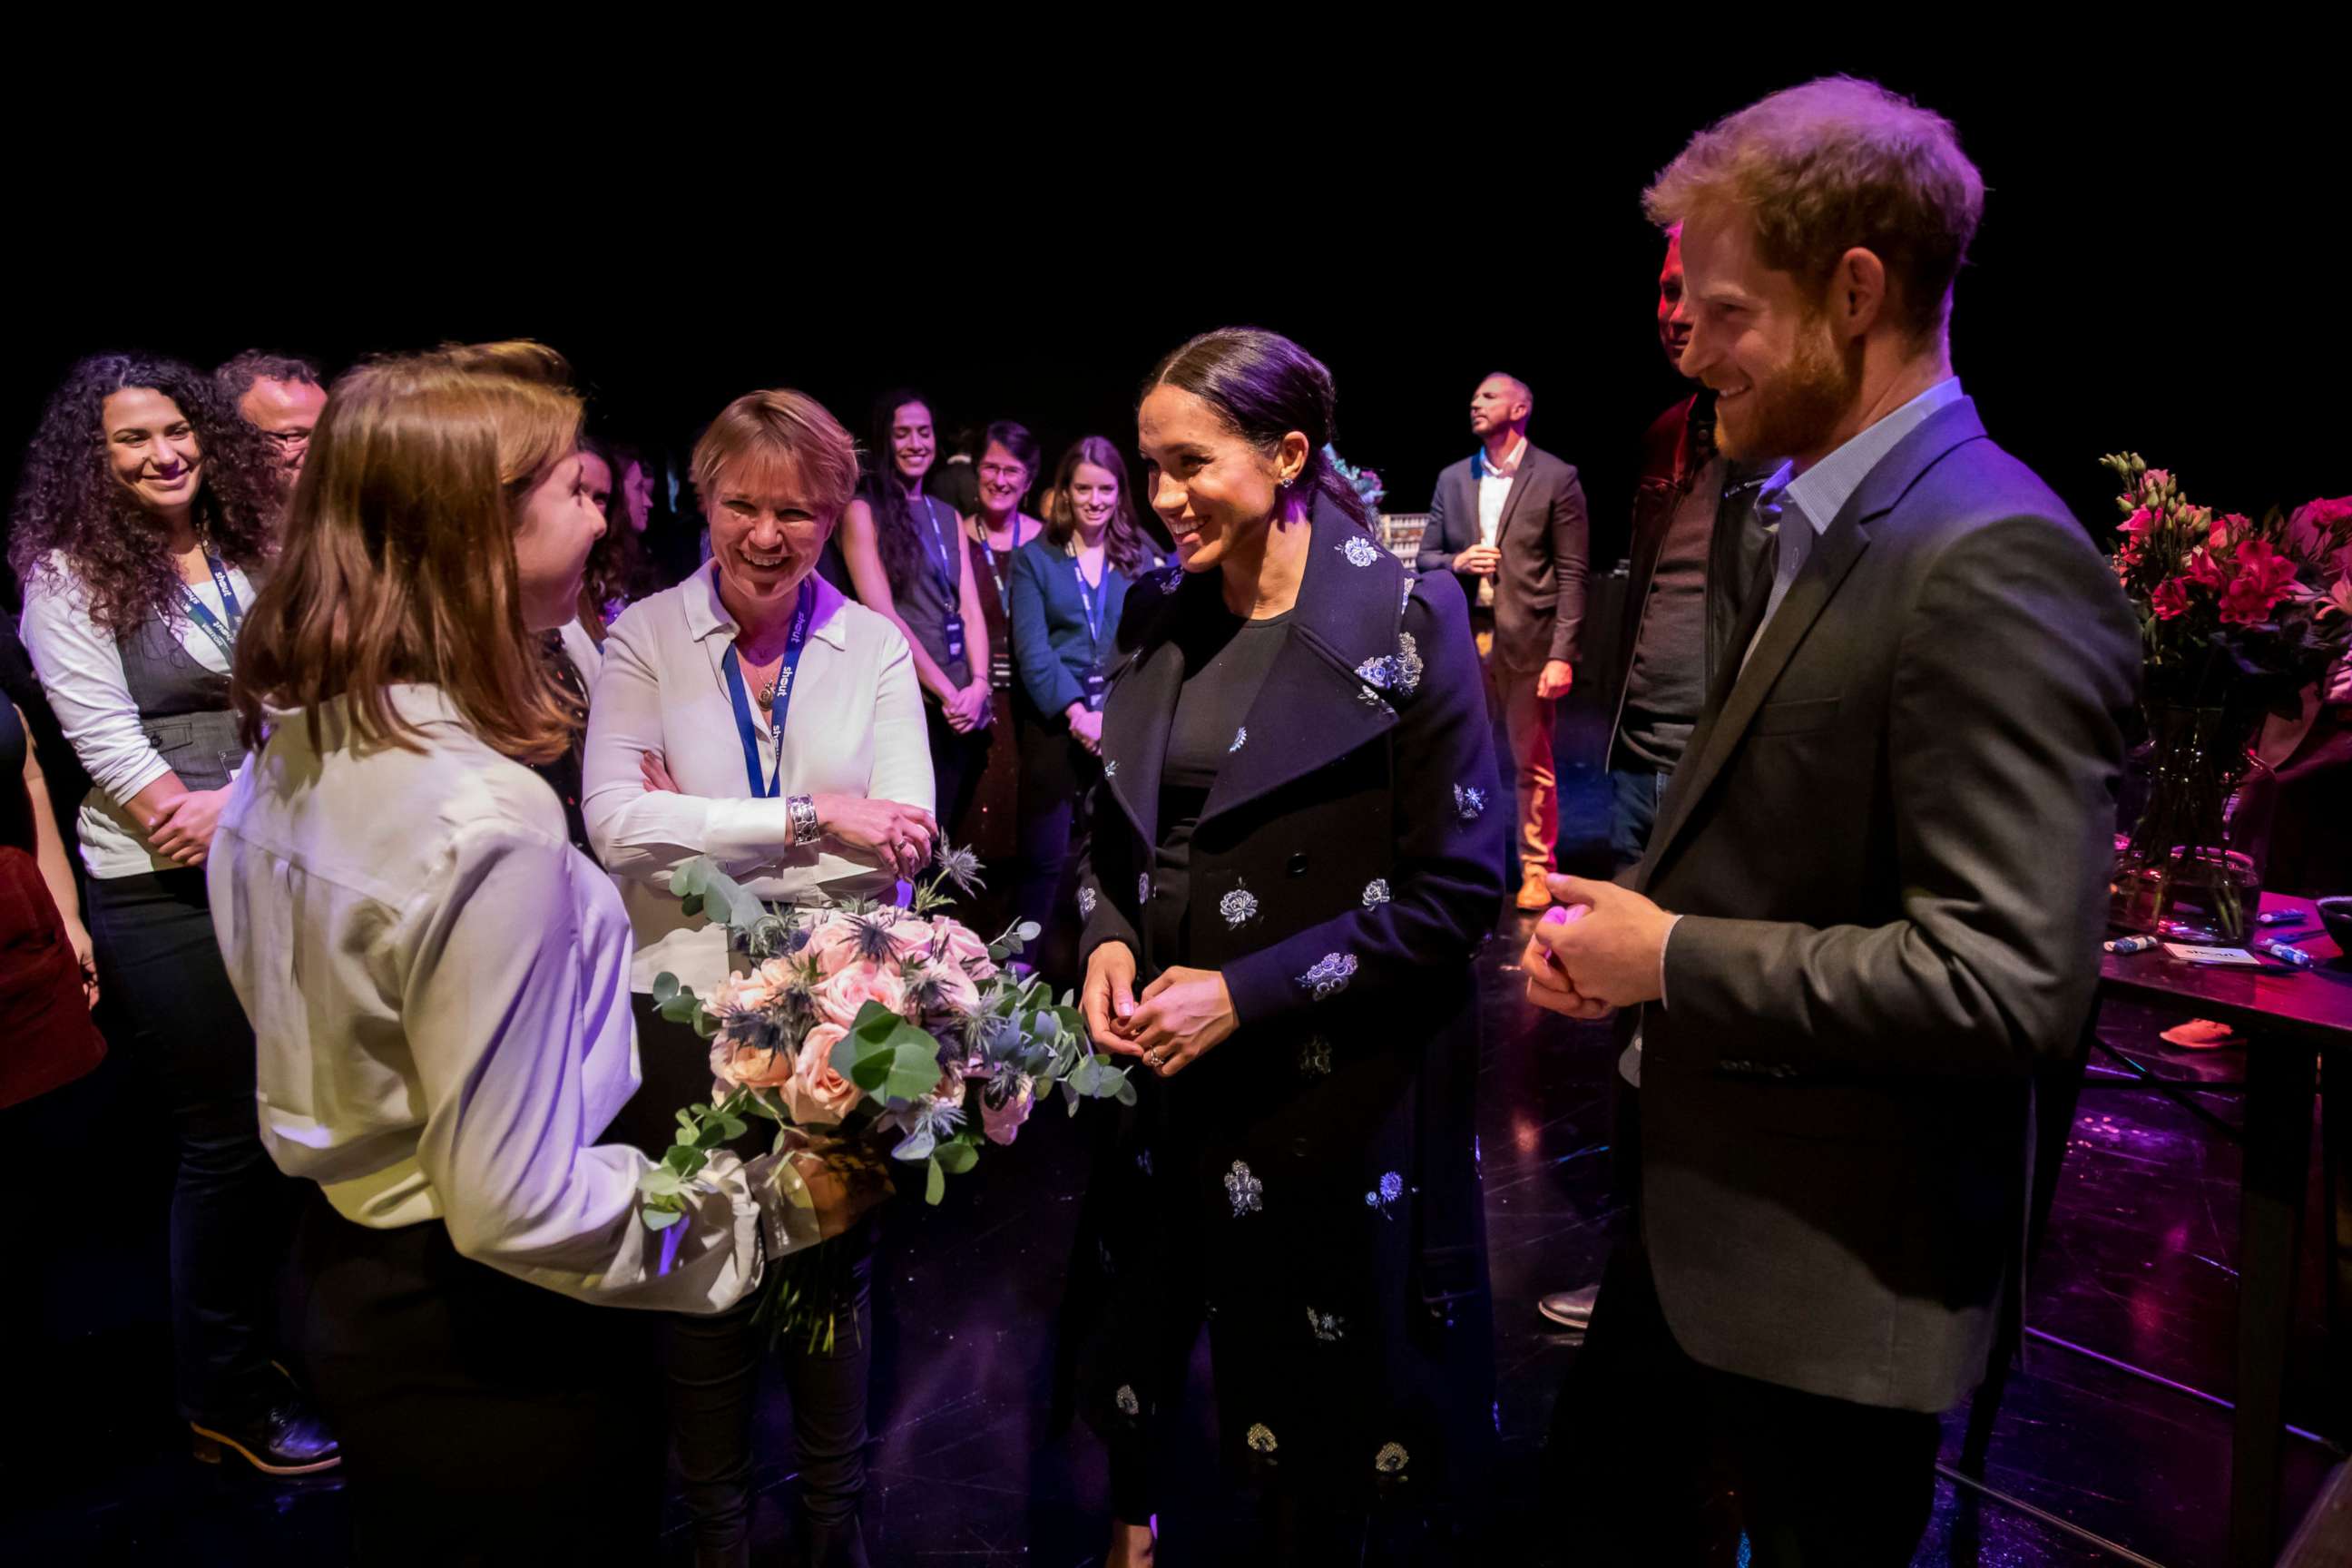 PHOTO: Prince Harry and Meghan Duchess of Sussex meet volunteers working with a  text messaging service in the U.K. which aims to provide 24/7 support for anyone experiencing mental health crisis, in a photo released by Kensington Palace on May 9, 2019.